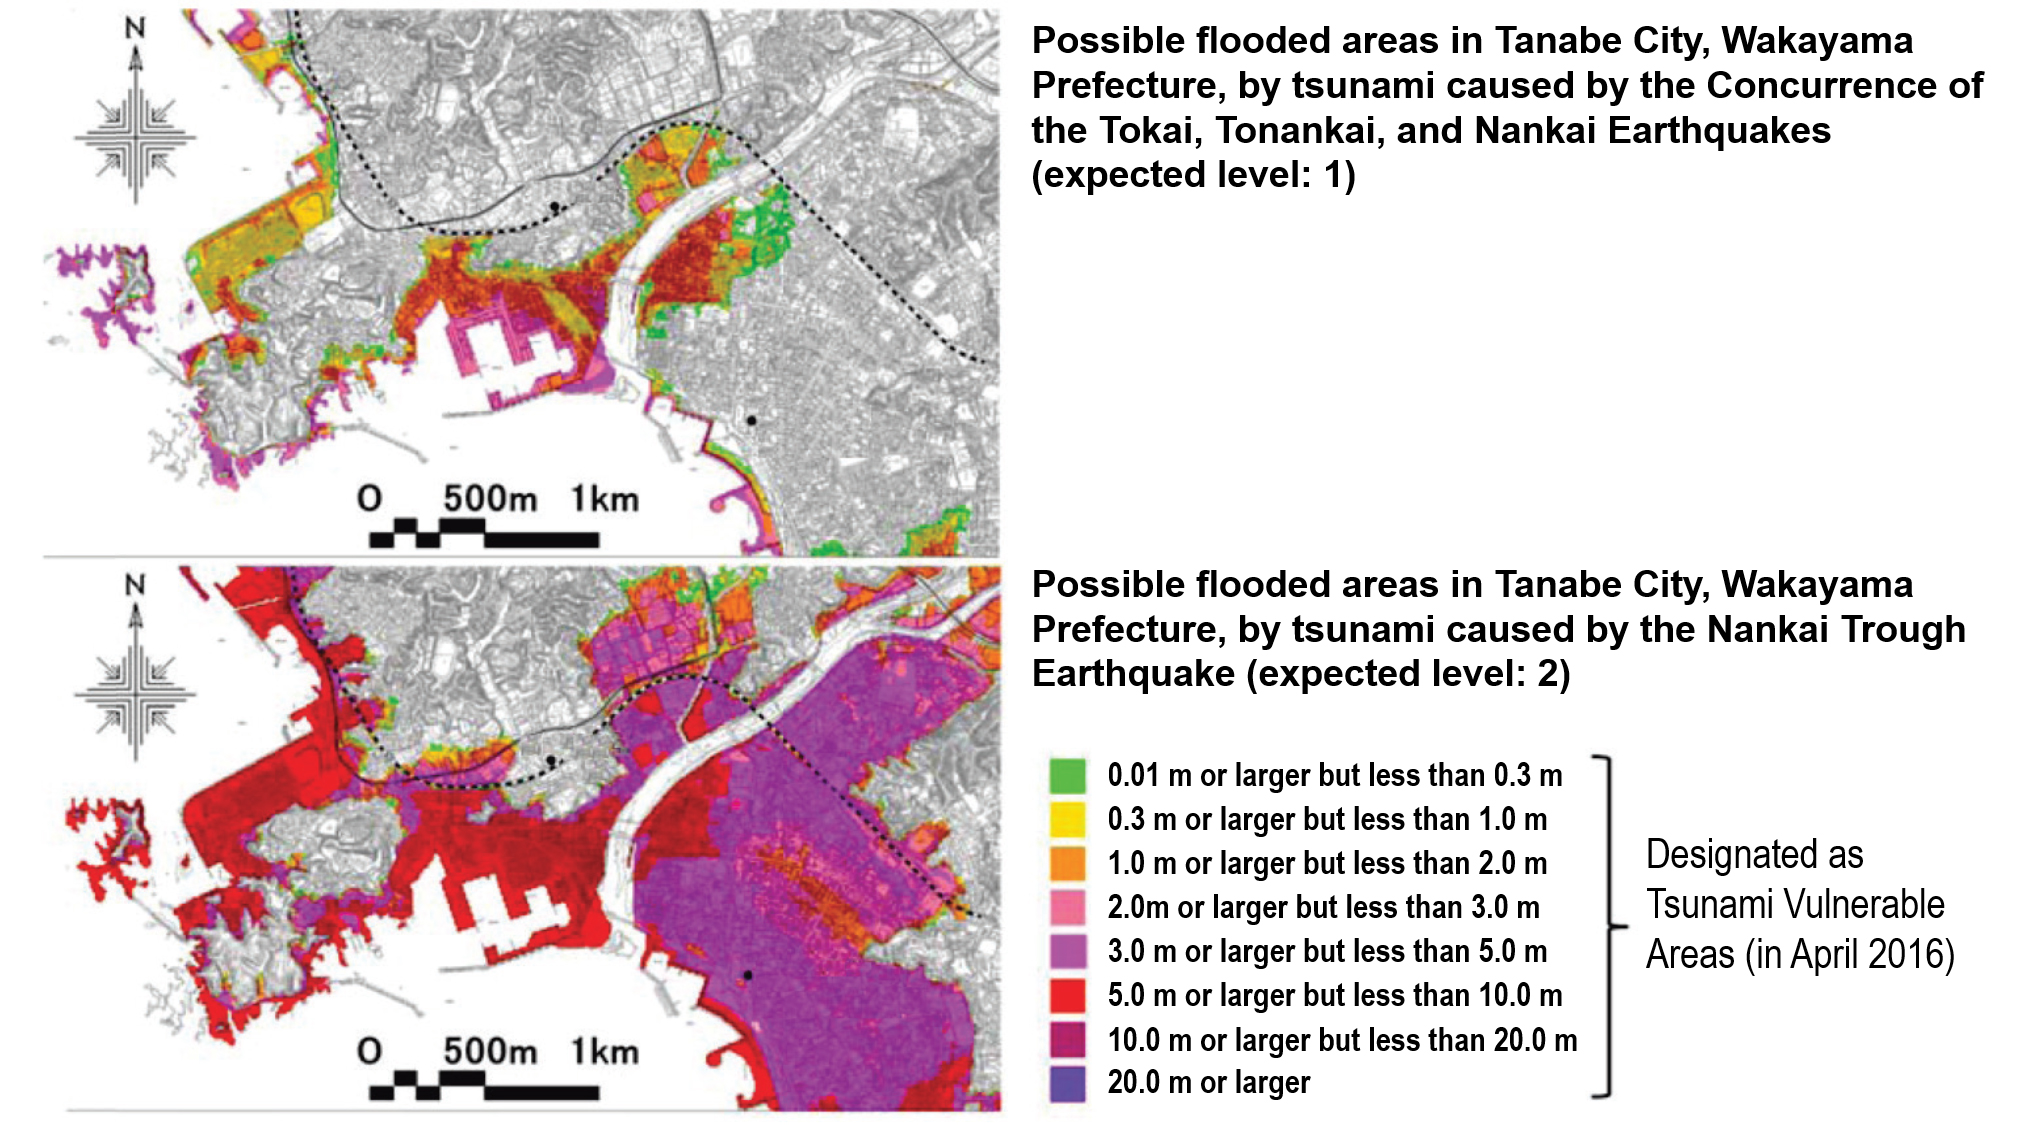 Figure 4.4.6.2.2 Examples of expected areas flooded by Two Tsunamis (level1 and Level 2)